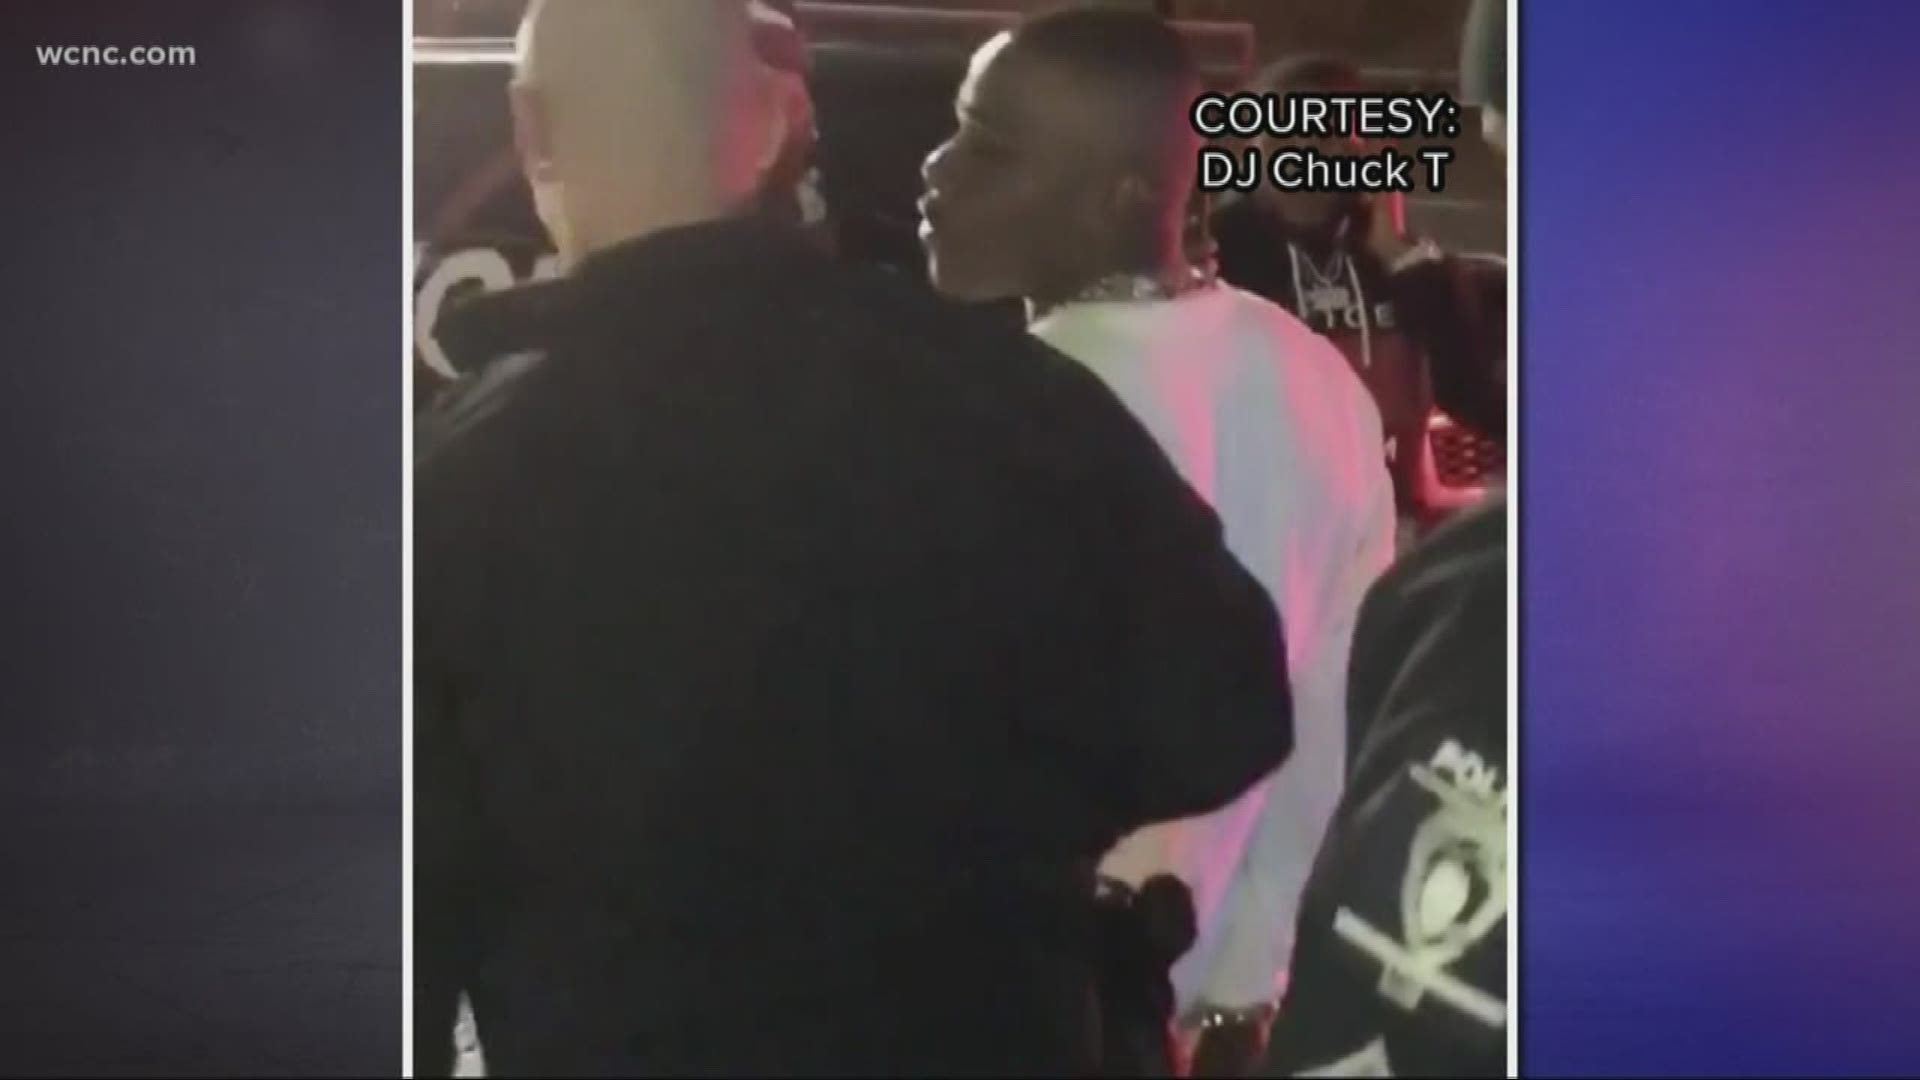 Grammy-nominated rapper DaBaby was just released from jail Tuesday morning after being detained after his show in Charlotte.